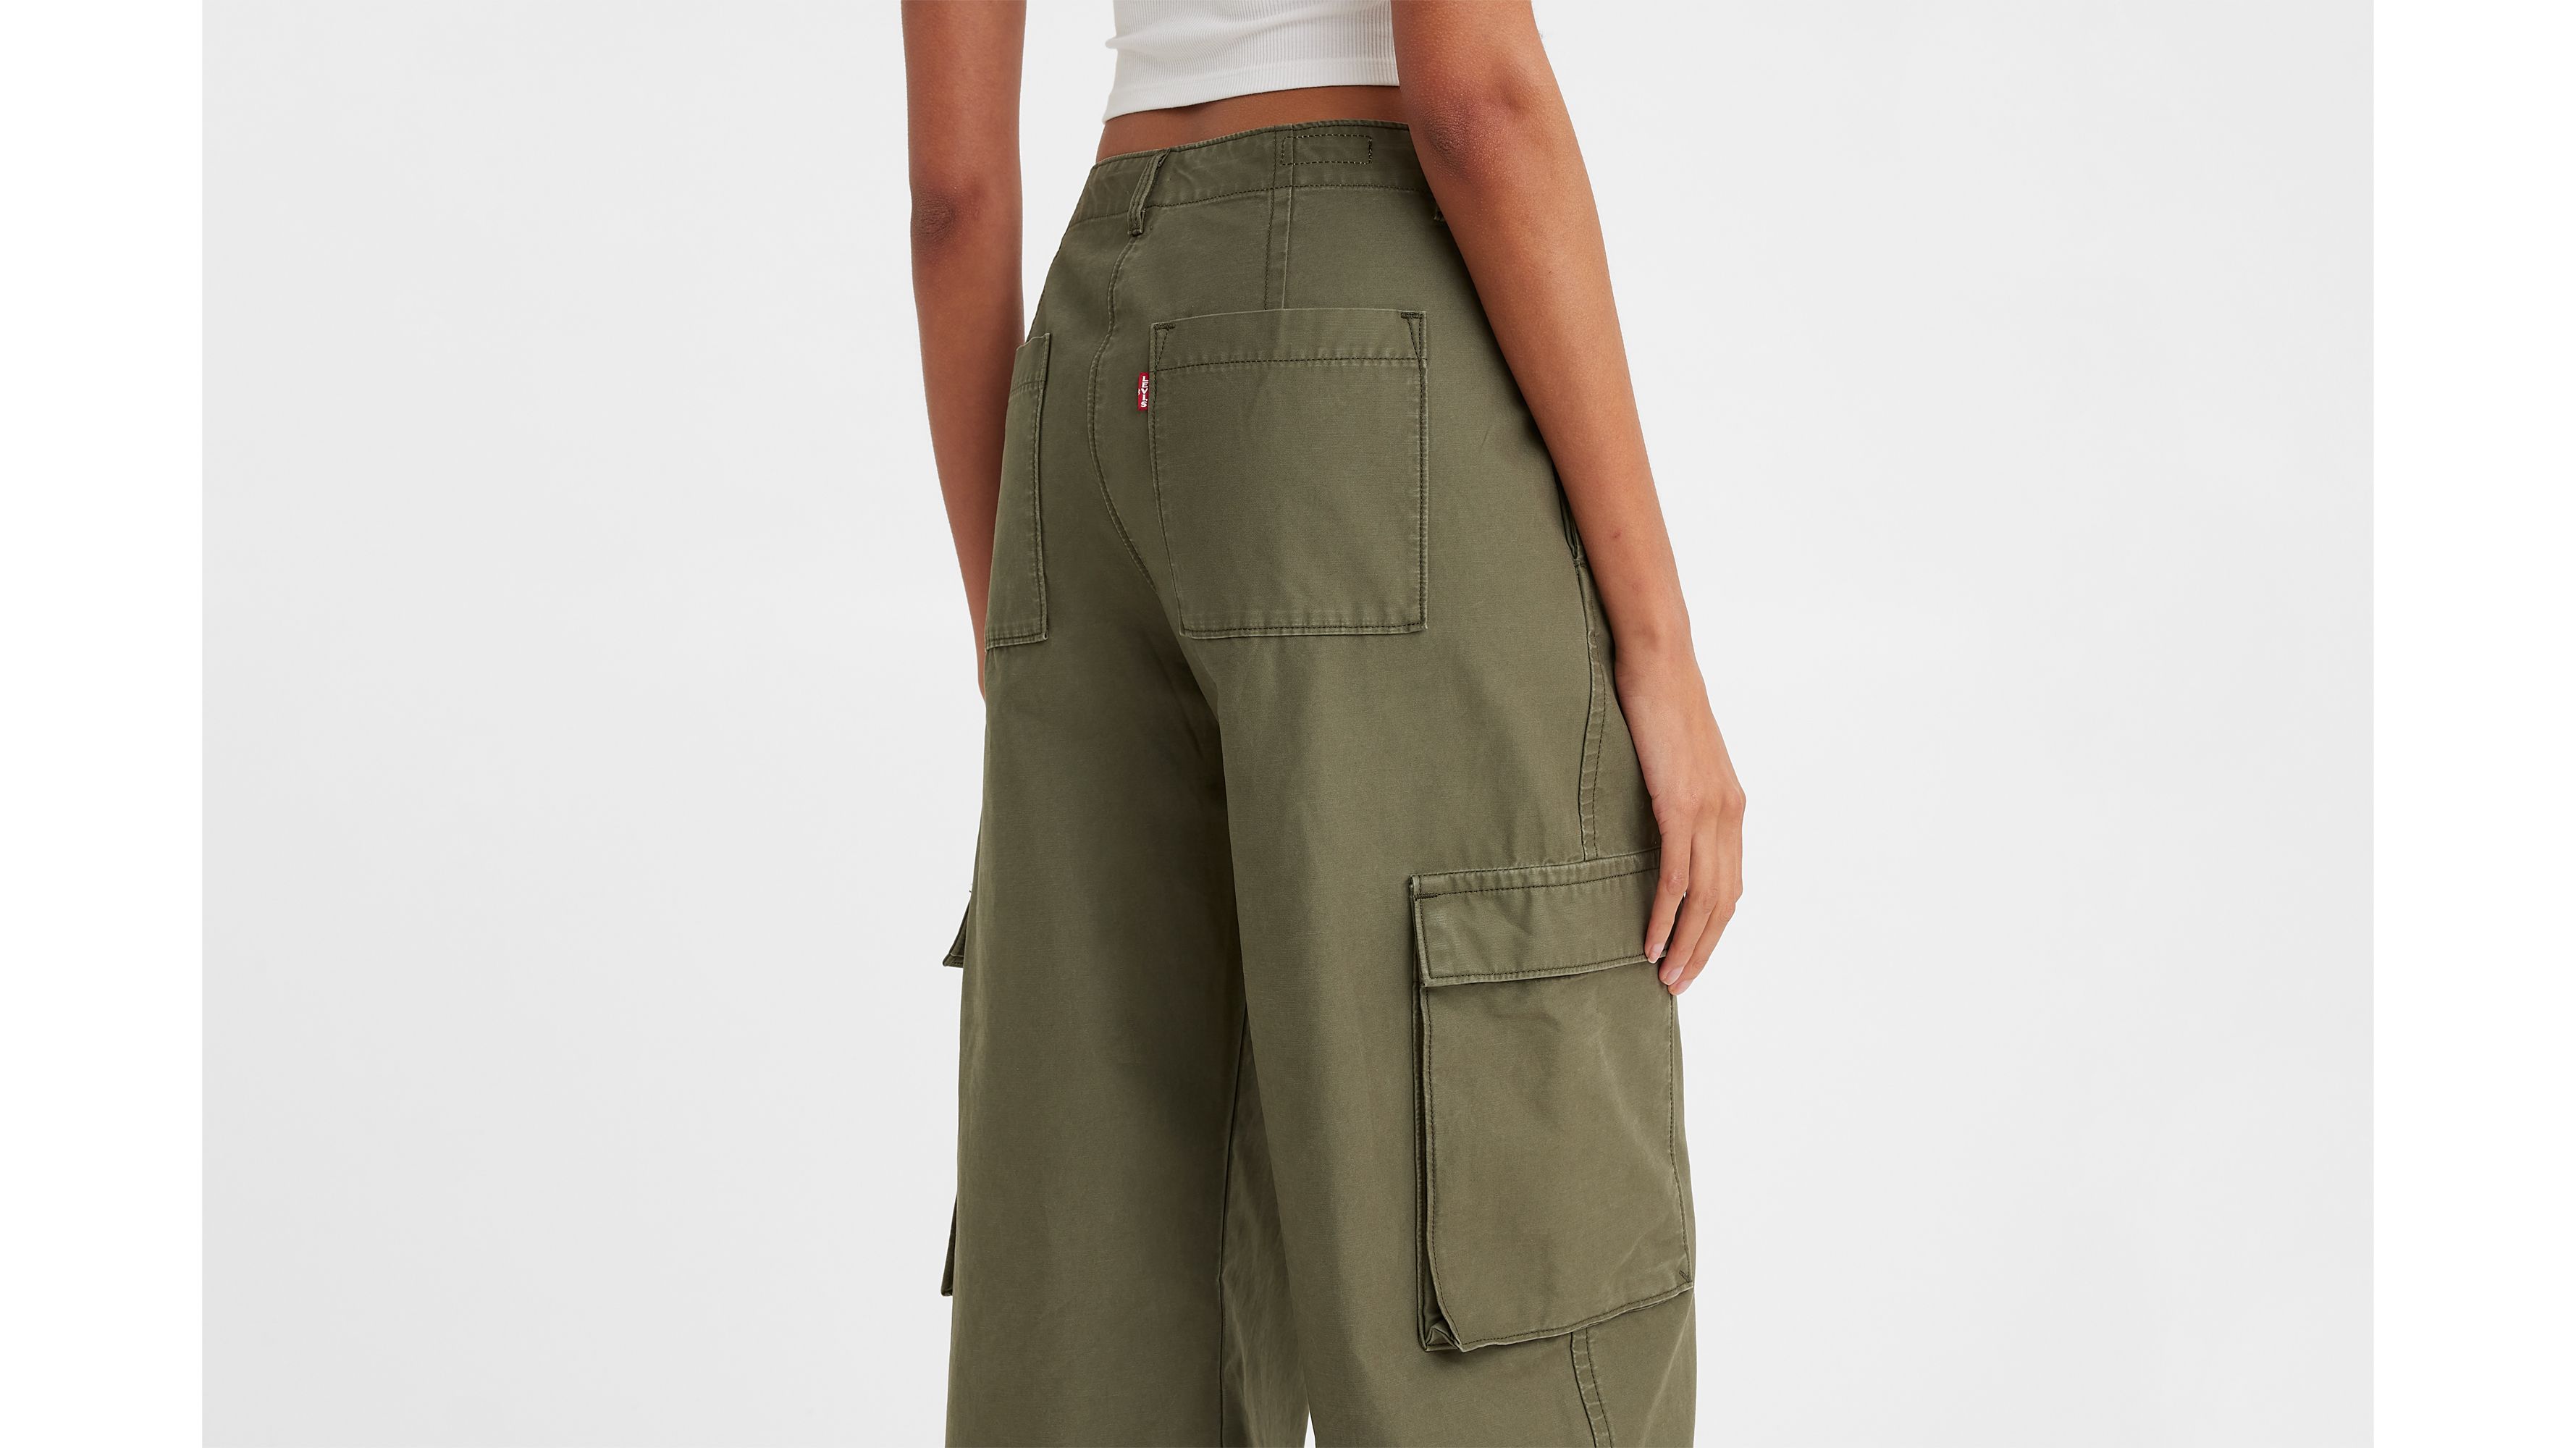 Sonoma Old Moss Green Skimmer Pants Mid Rise Cargo Pockets Women's